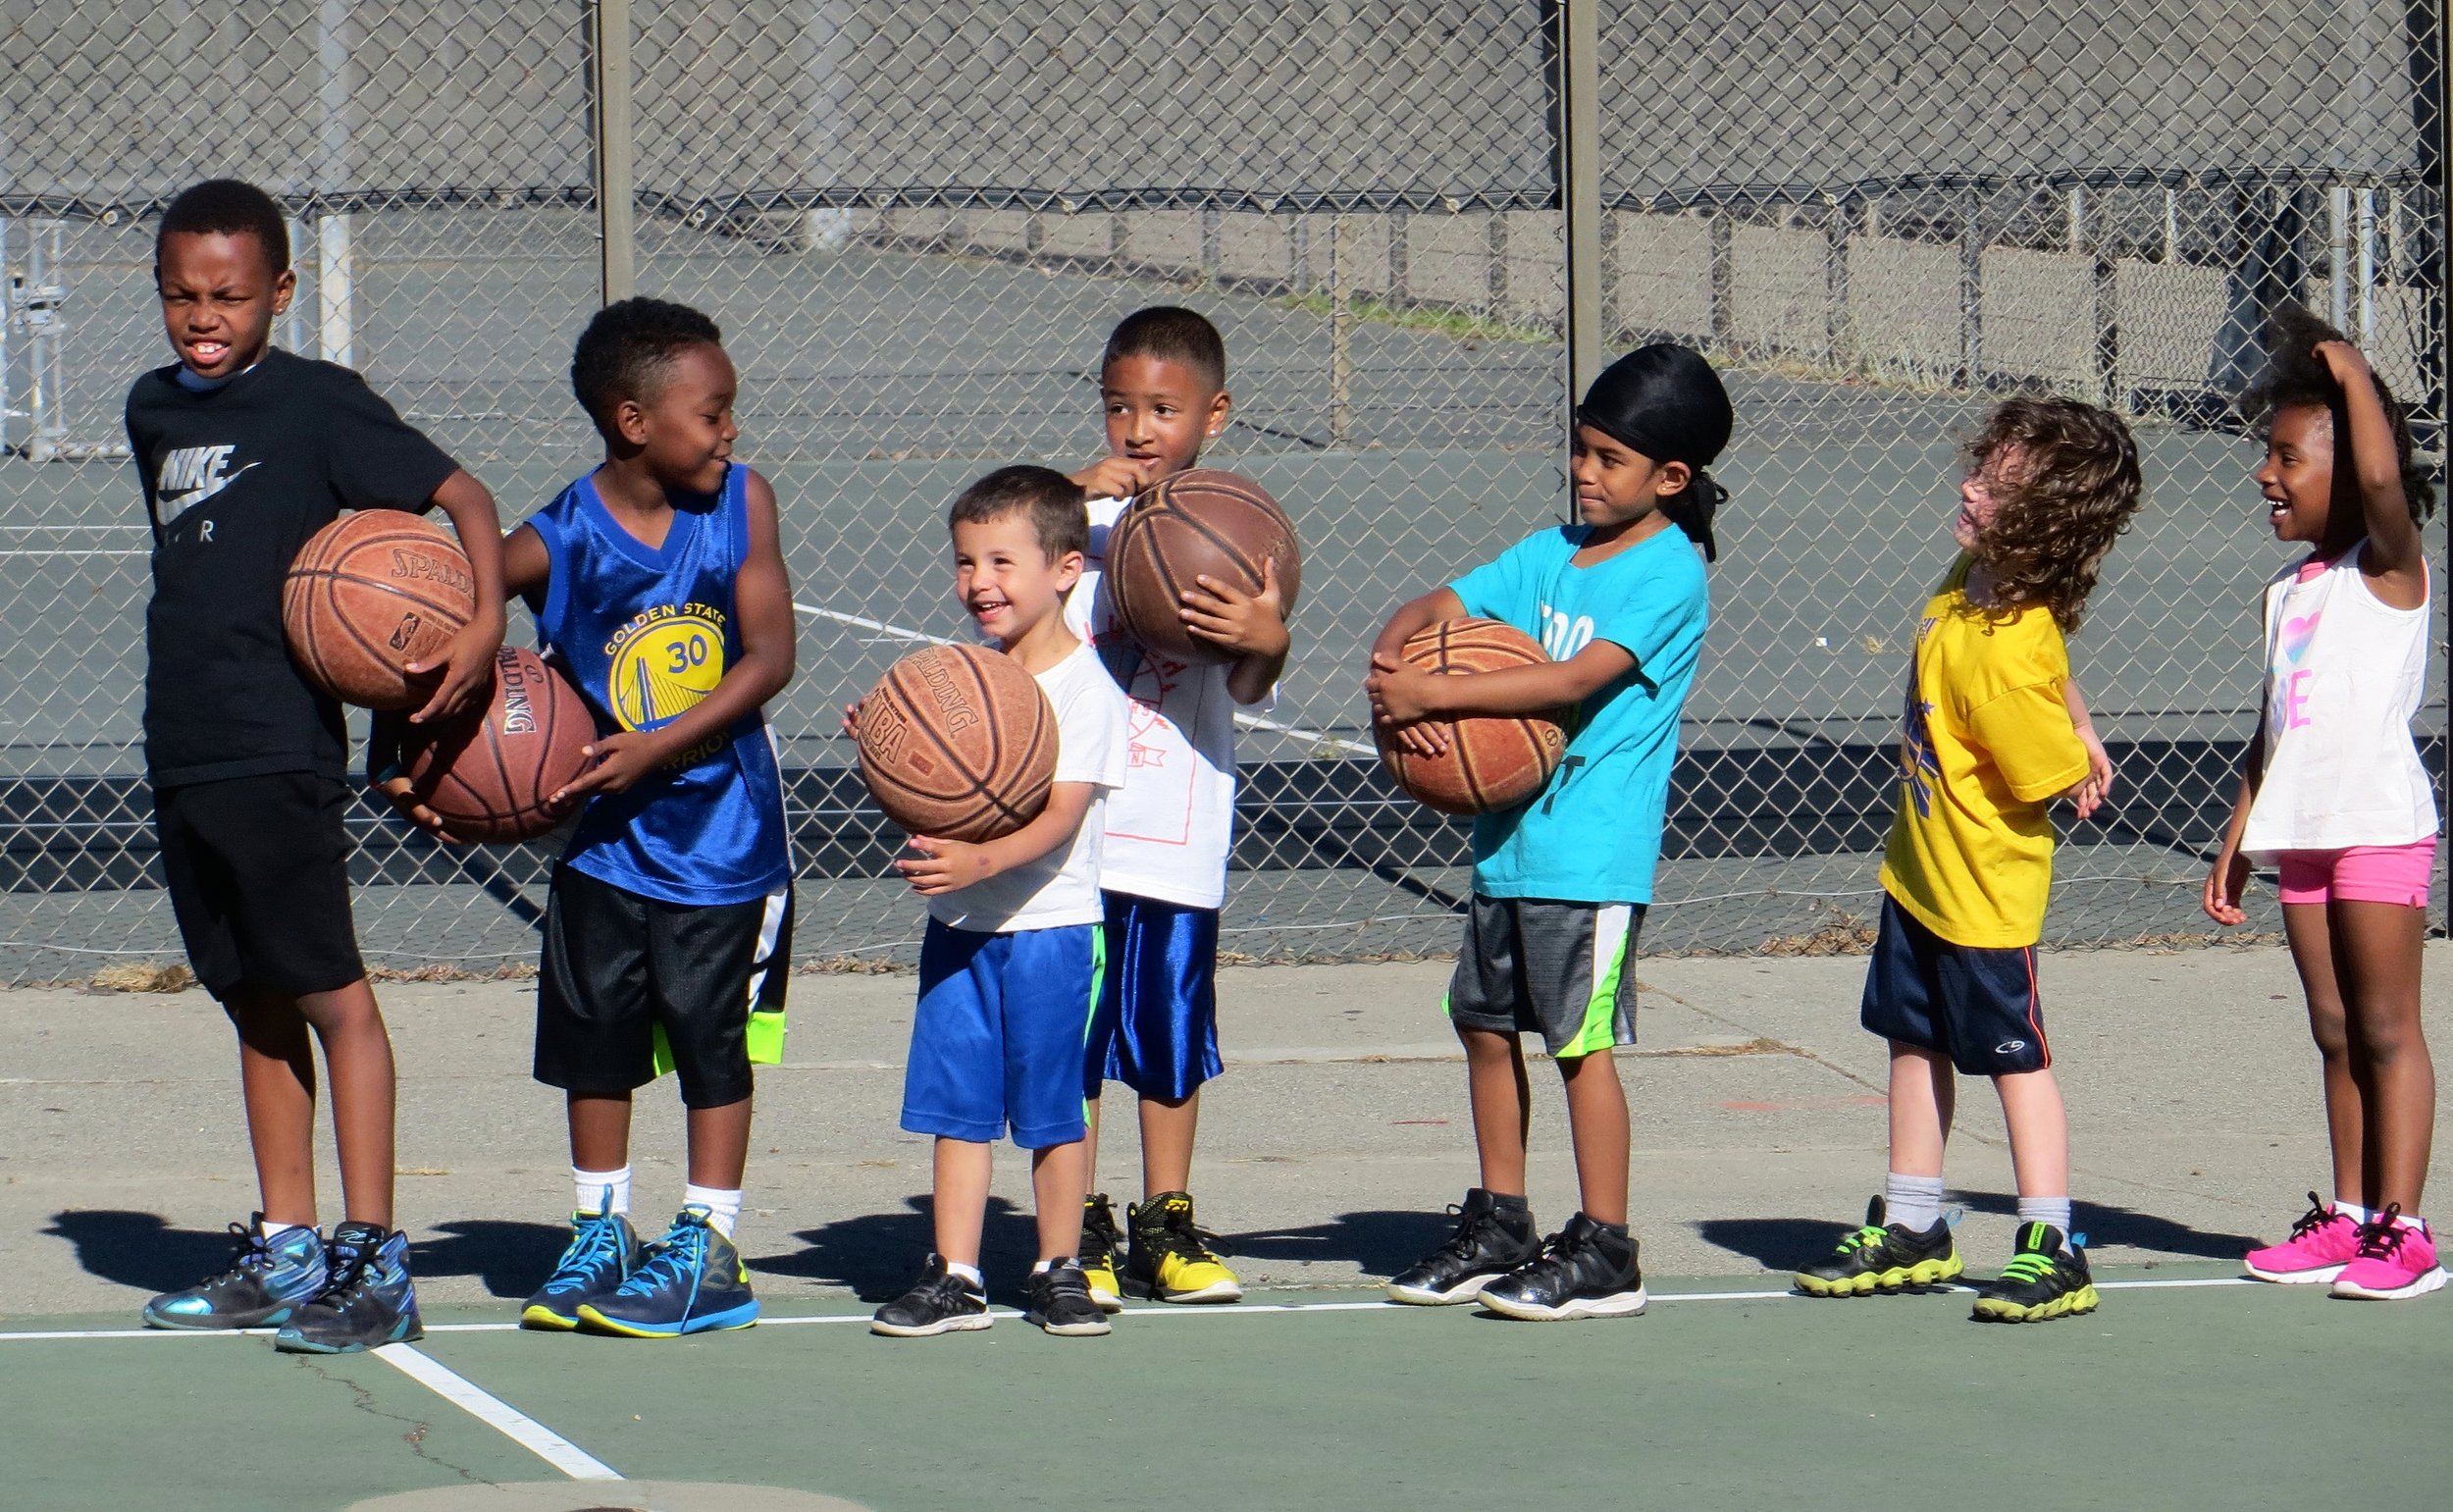 Children smiling and standing in line on a basketball court